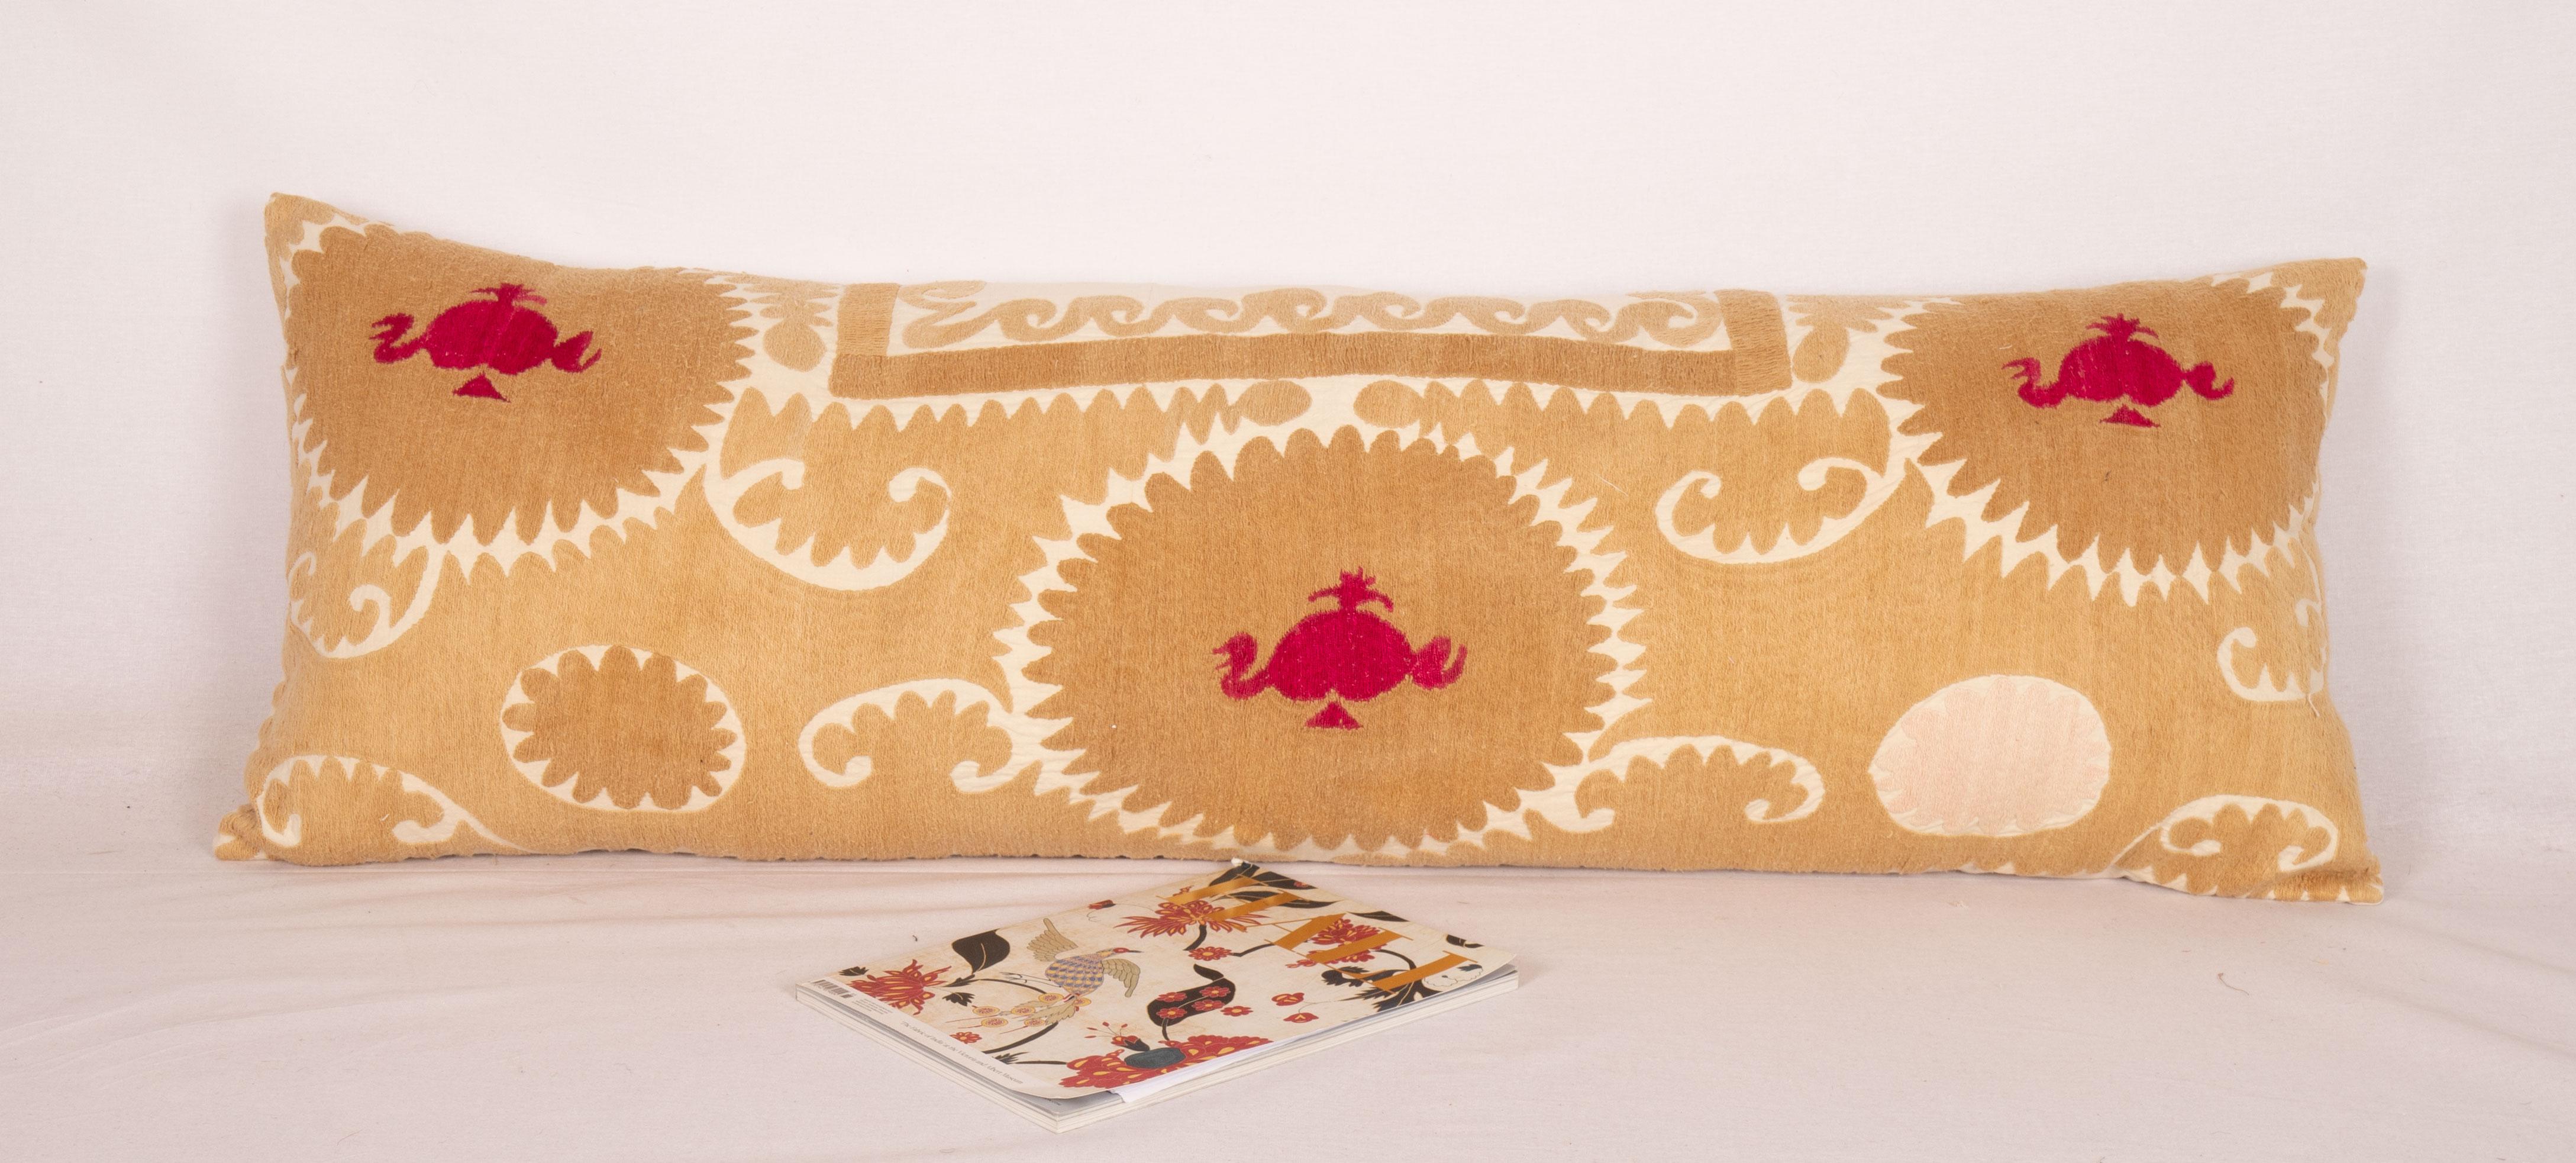 Embroidered Suzani Pillow Case, Made from a Mid 20th C. Uzbek Suzani